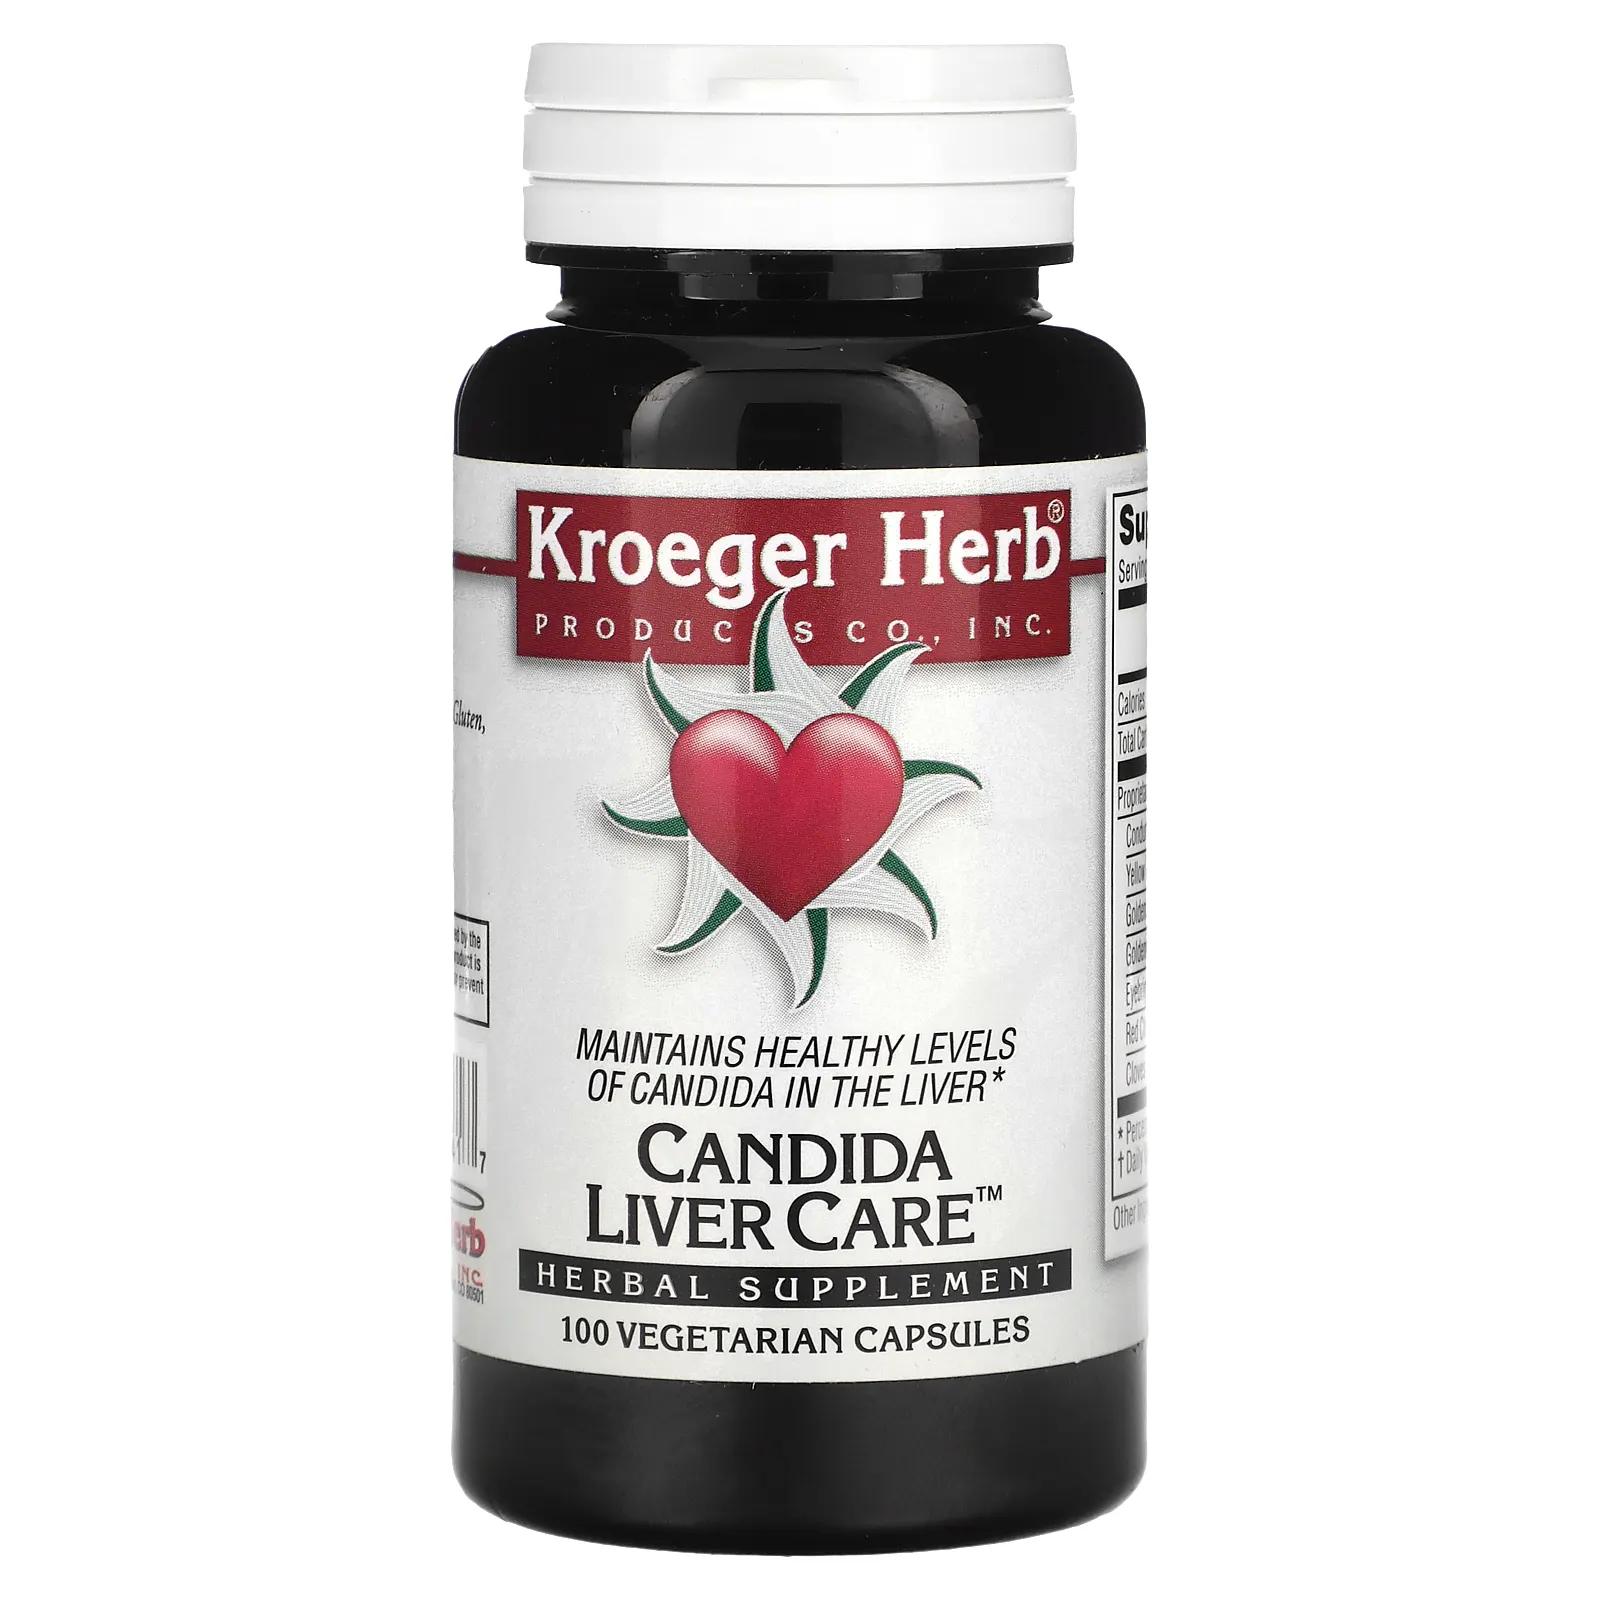 kroeger herb co sunny day таурин дофил 100 таблеток Kroeger Herb Co Candida Liver Care 100 Vegetarian Capsules